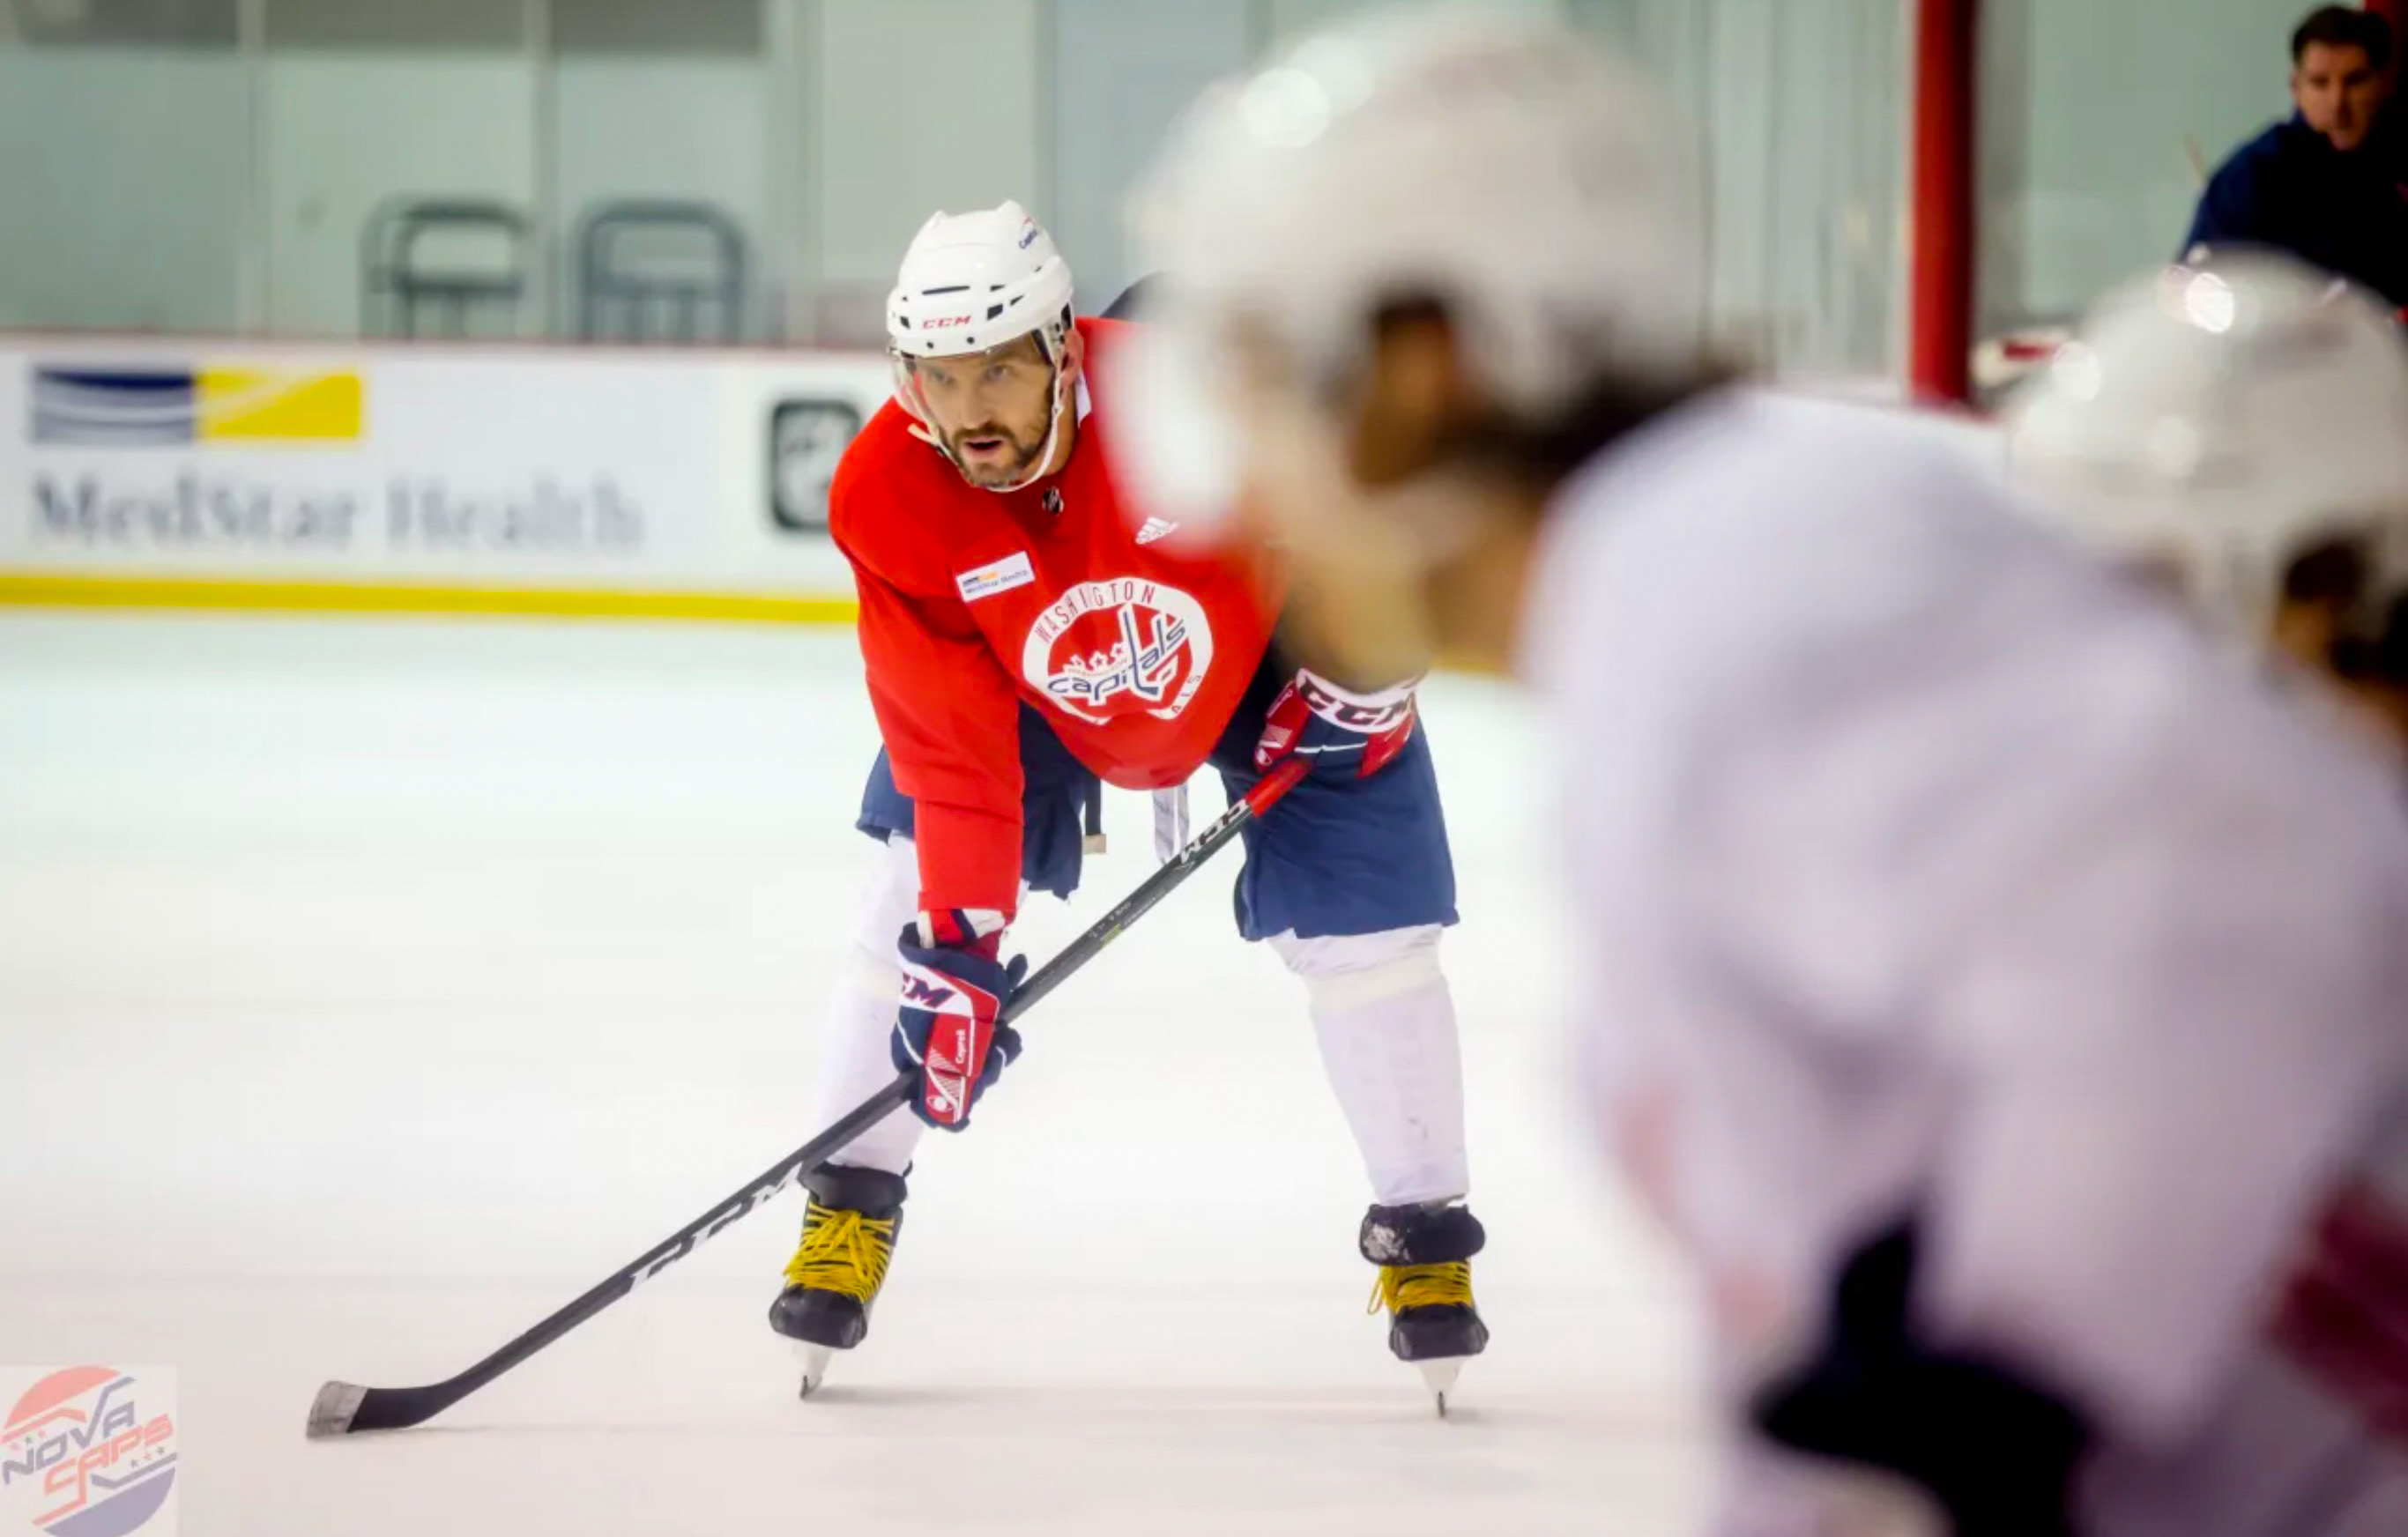 Monday's Capitals Practice Notebook: Nic Dowd Appears Ready To